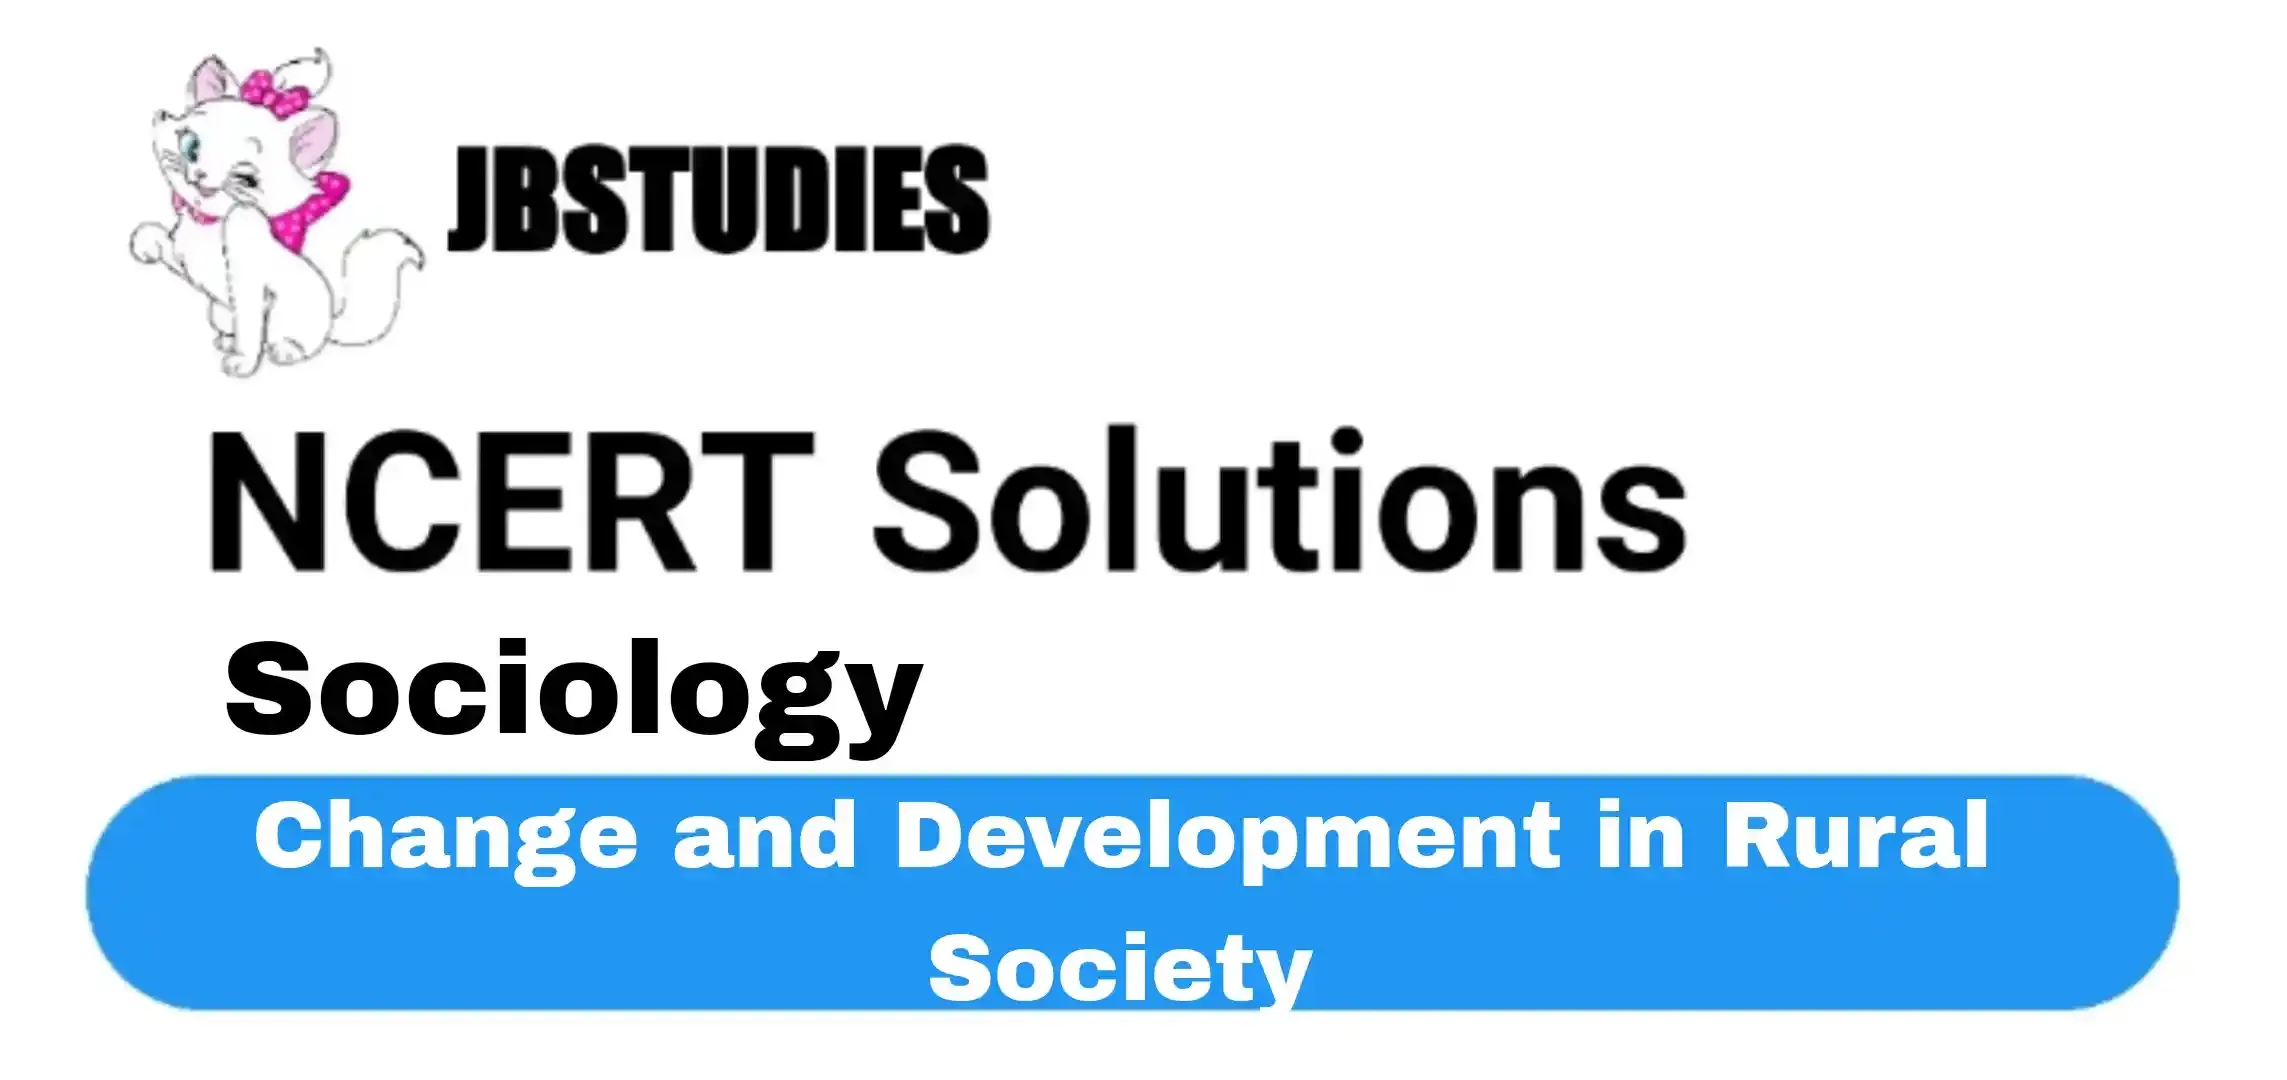 Solutions Class 12 Sociology Chapter -4 (Change and Development in Rural Society)